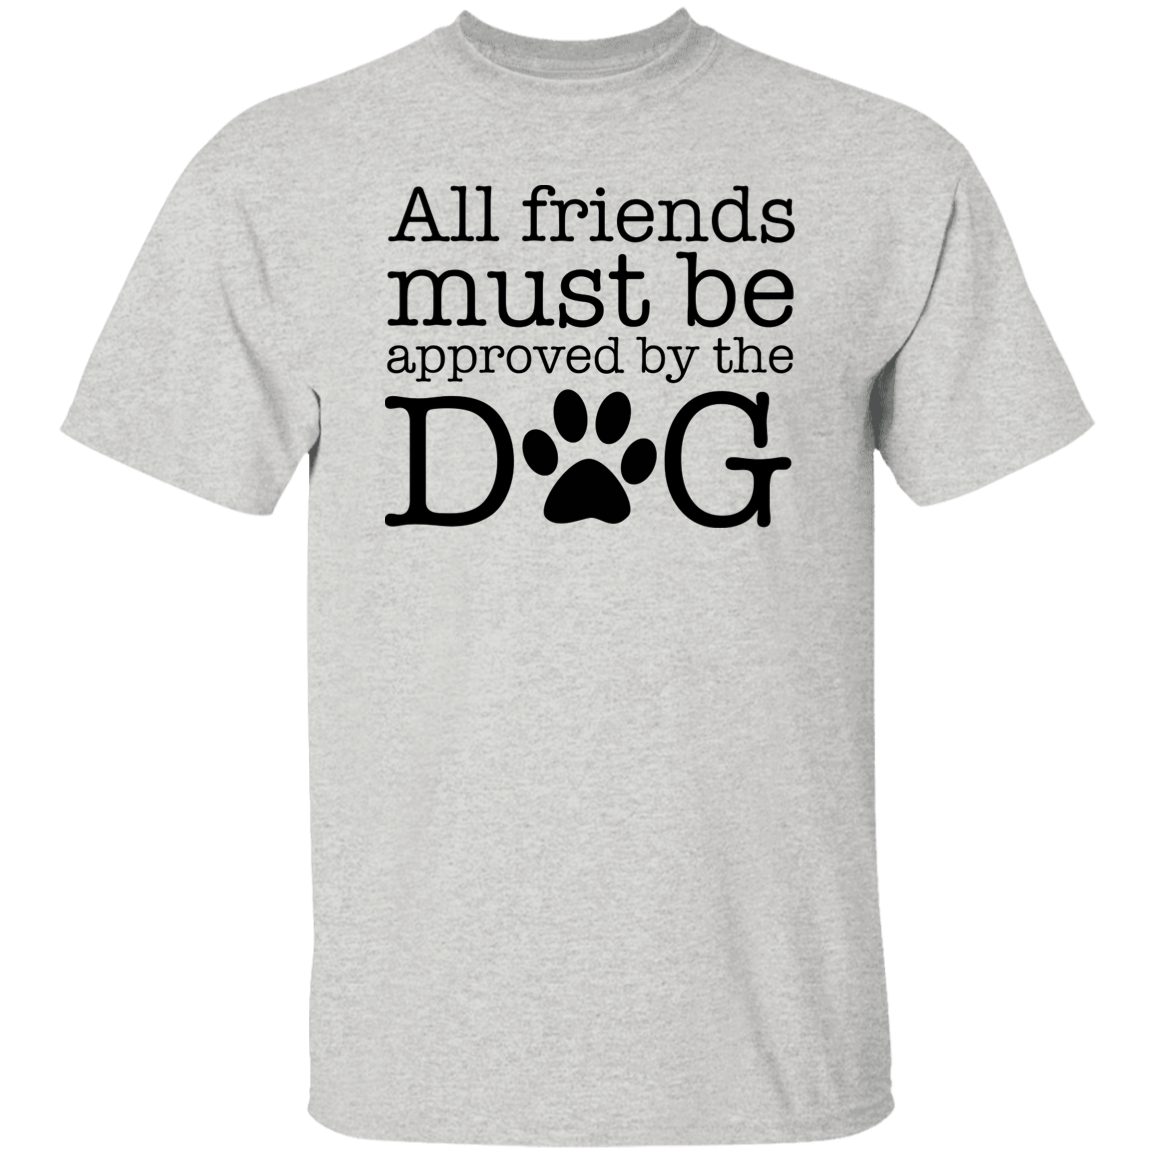 All My Friends Must Be Approved by the Dog  5.3 oz. T-Shirt